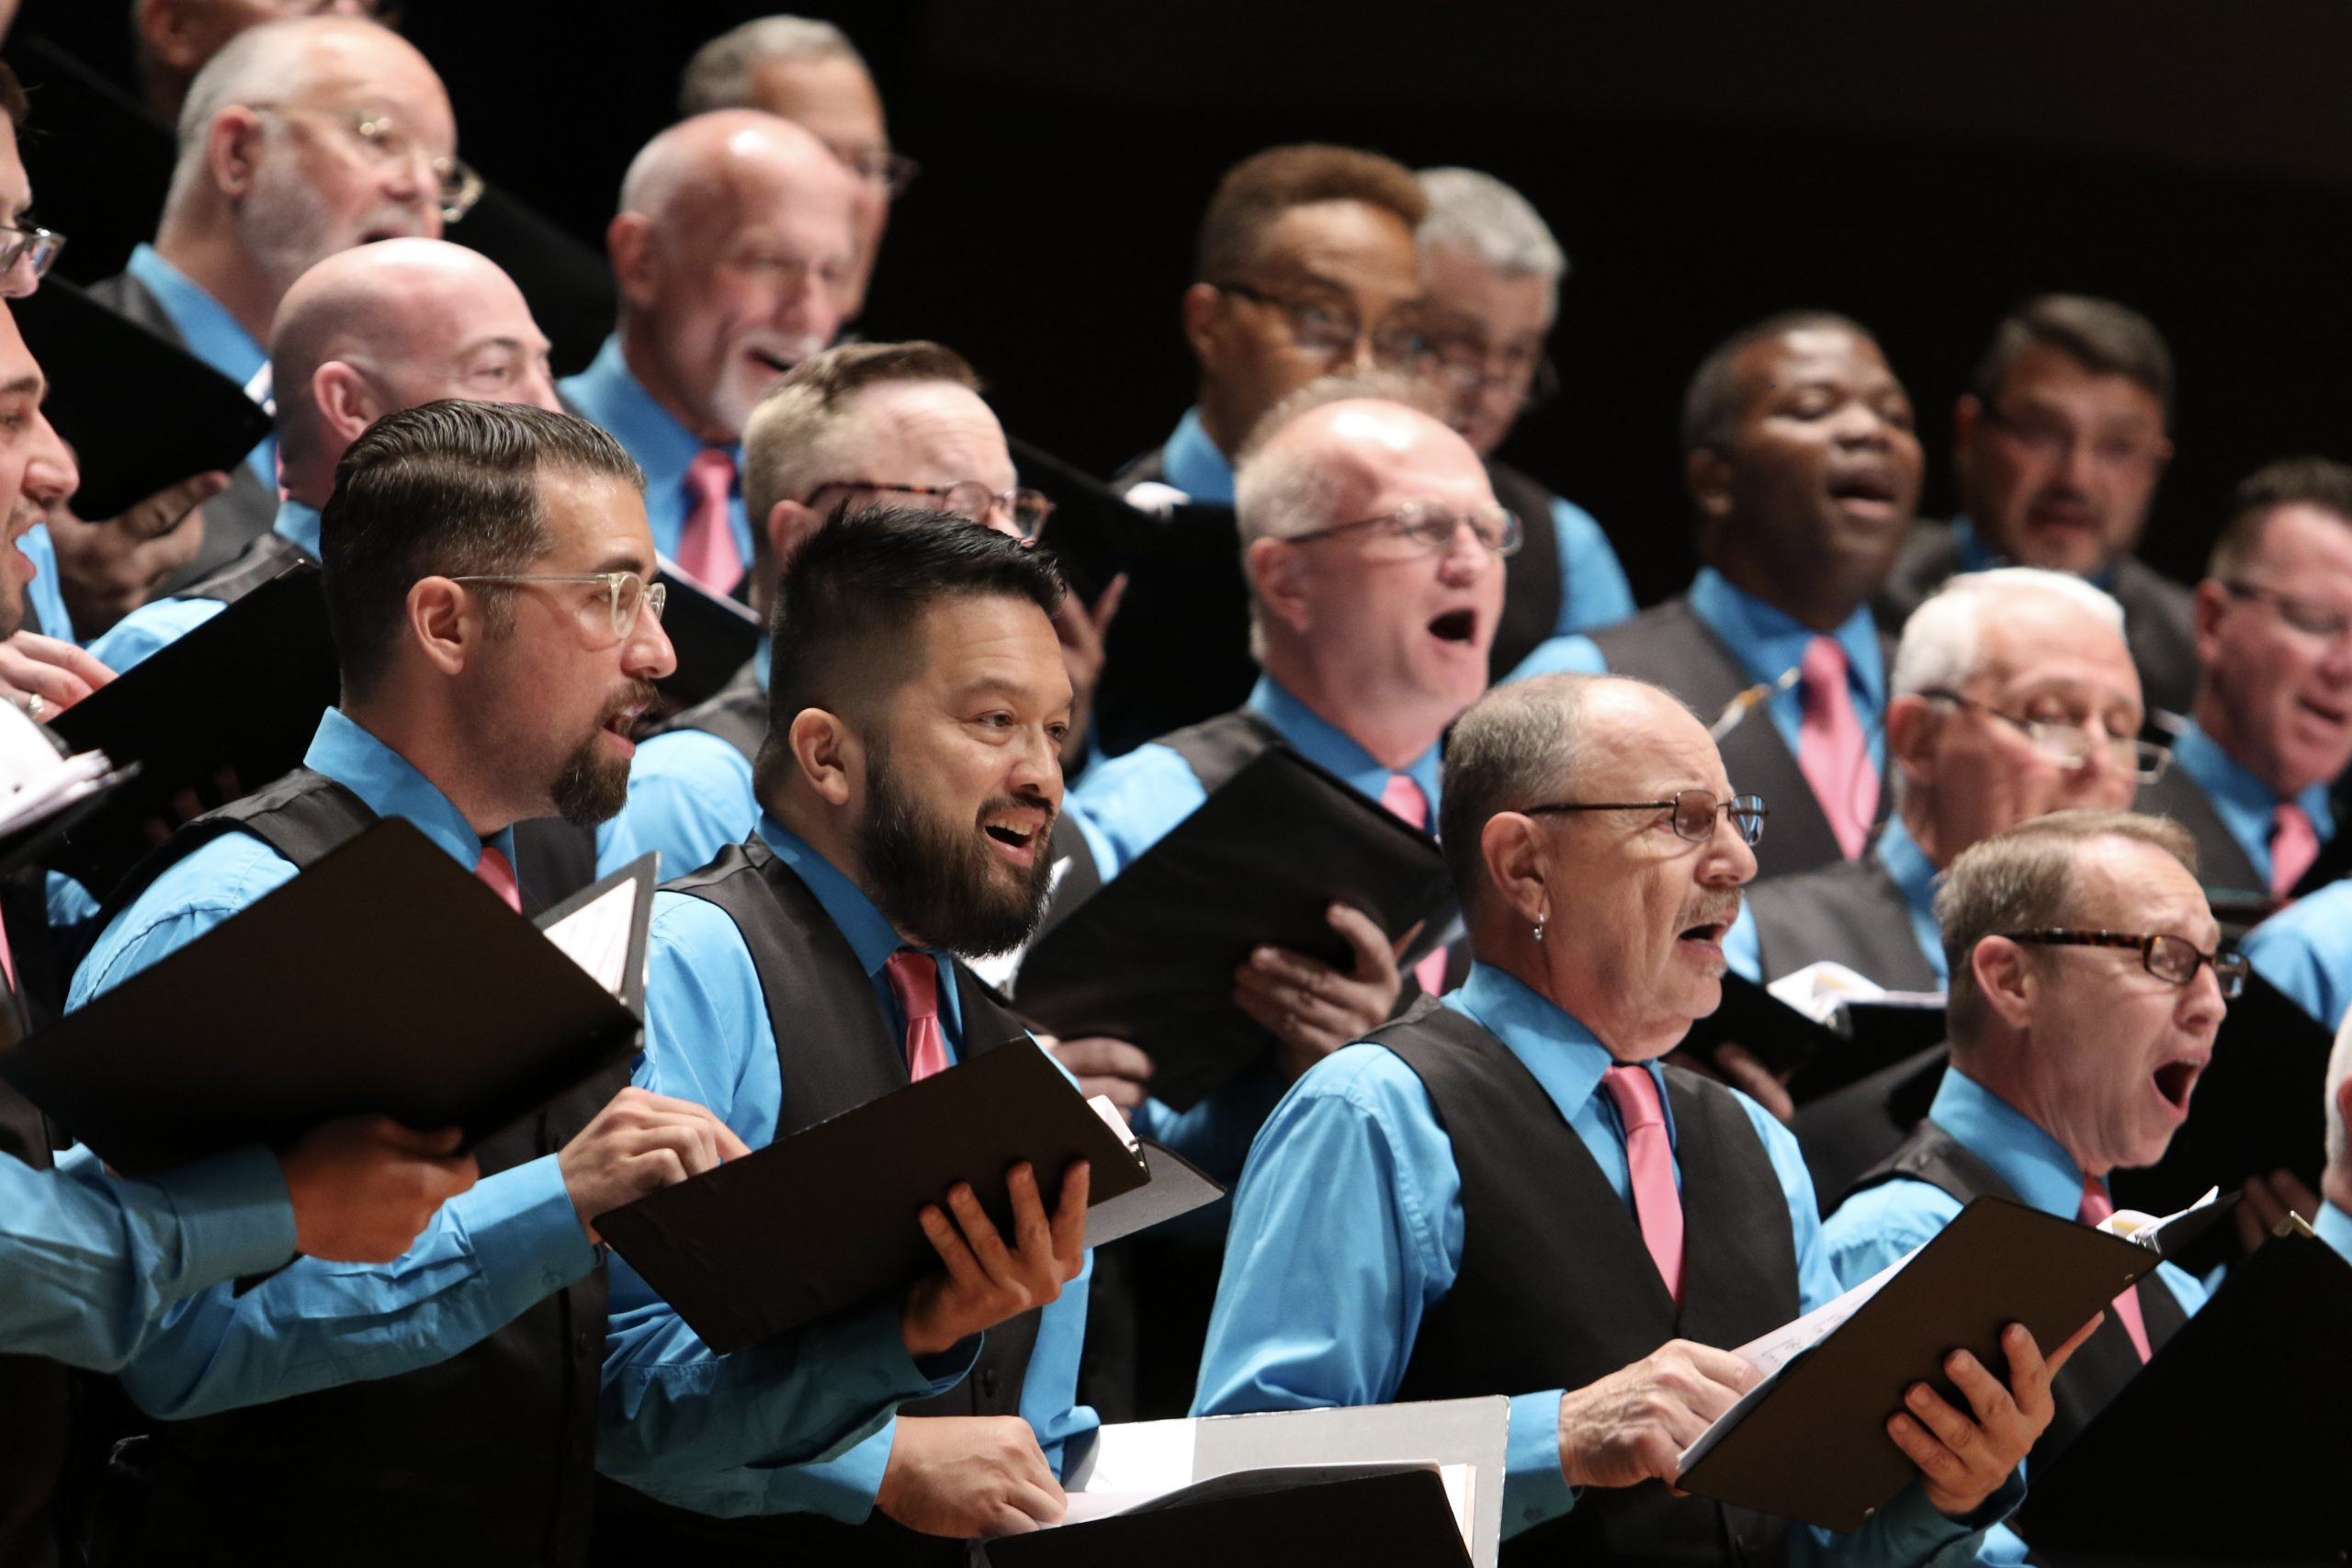 7,000 LGBTQ singers arrive in Minneapolis for five-day choral festival